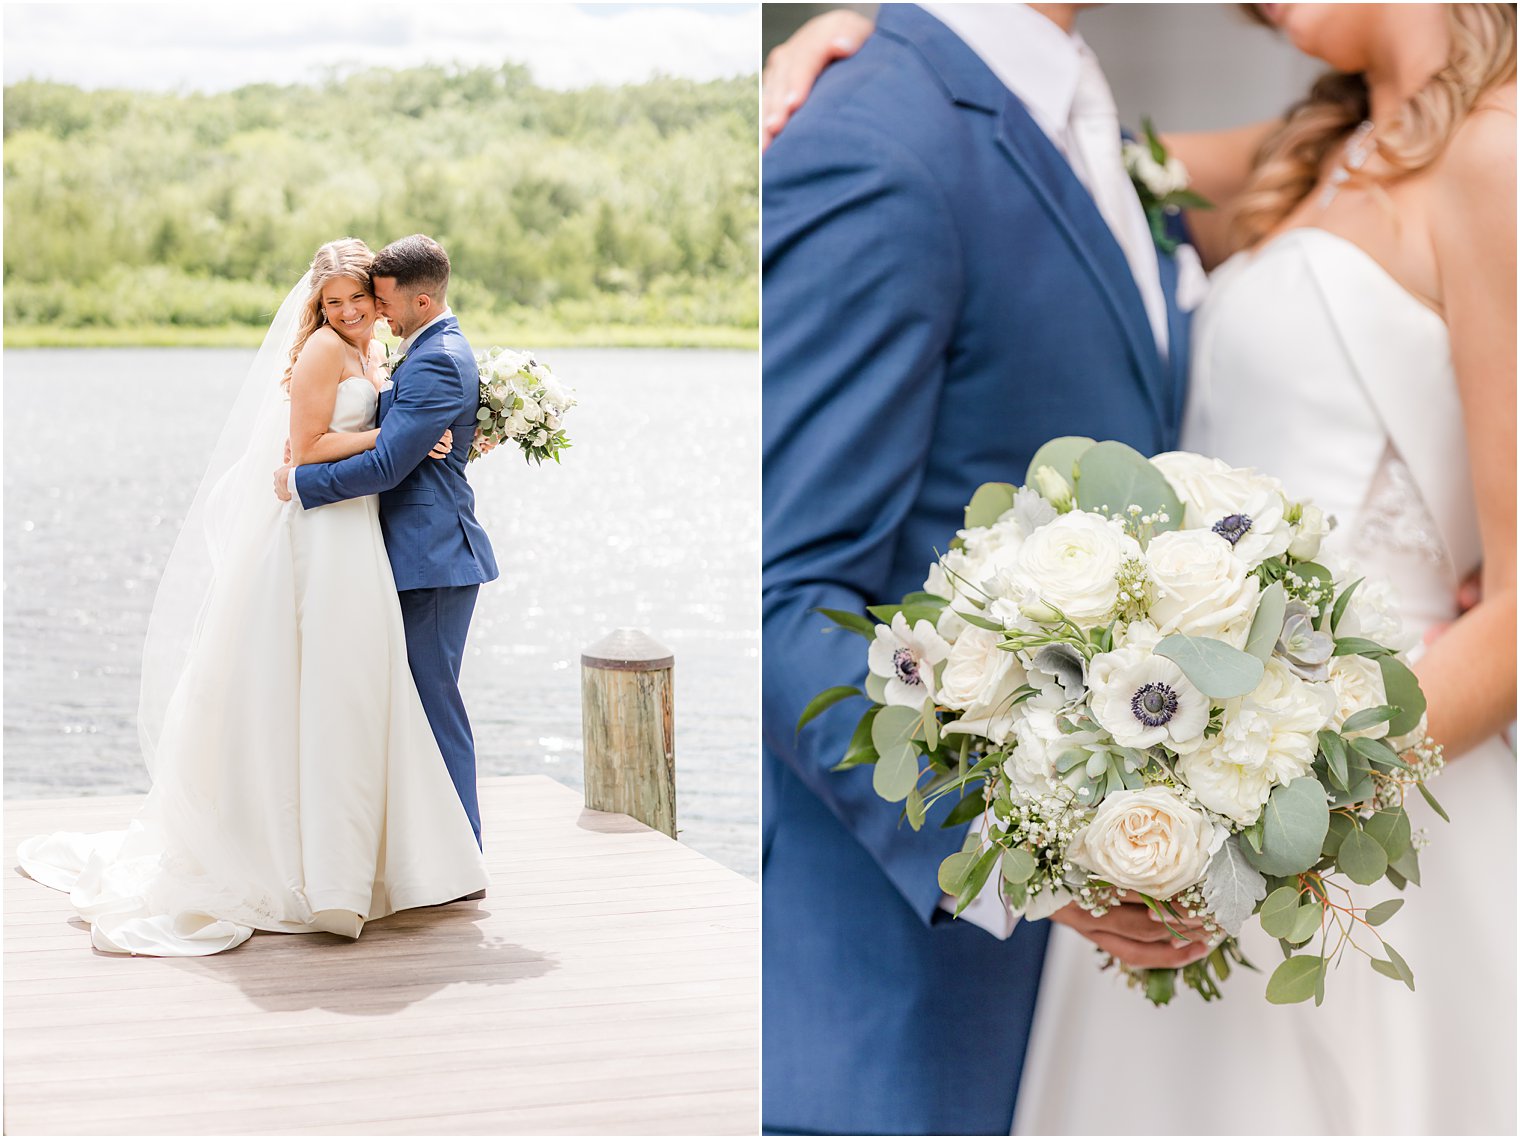 couple hugs on dock while bride holds bouquet of white and green against groom's arm